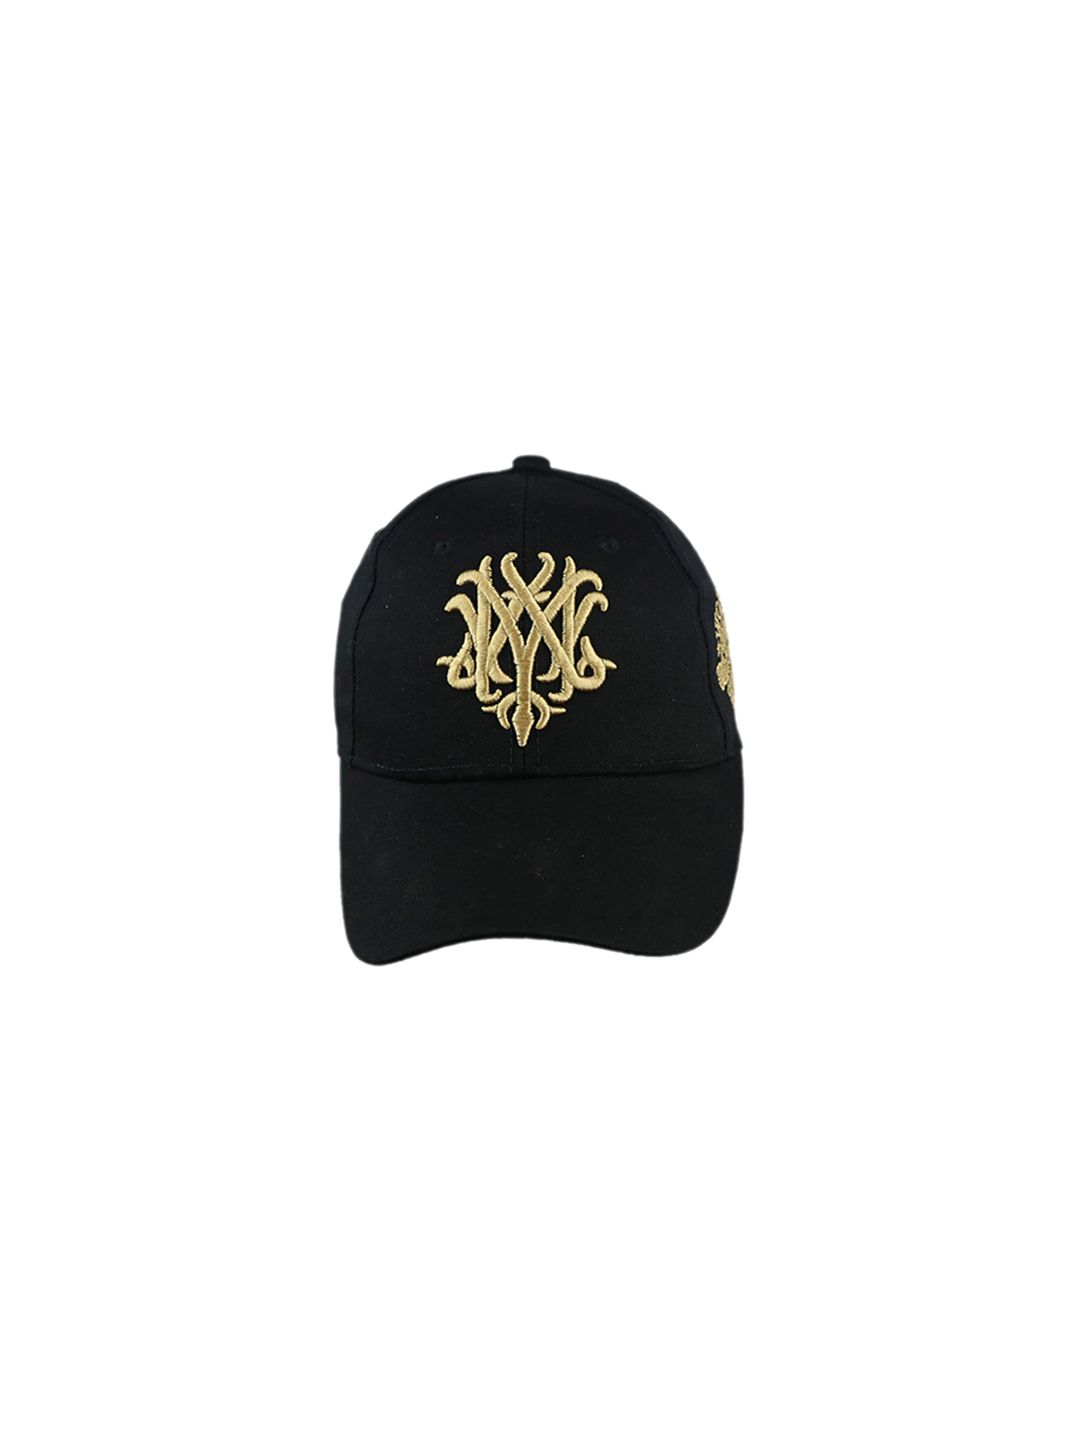 iSWEVEN Unisex Black & Gold Coloured Embroidered Snapback Cap Price in India